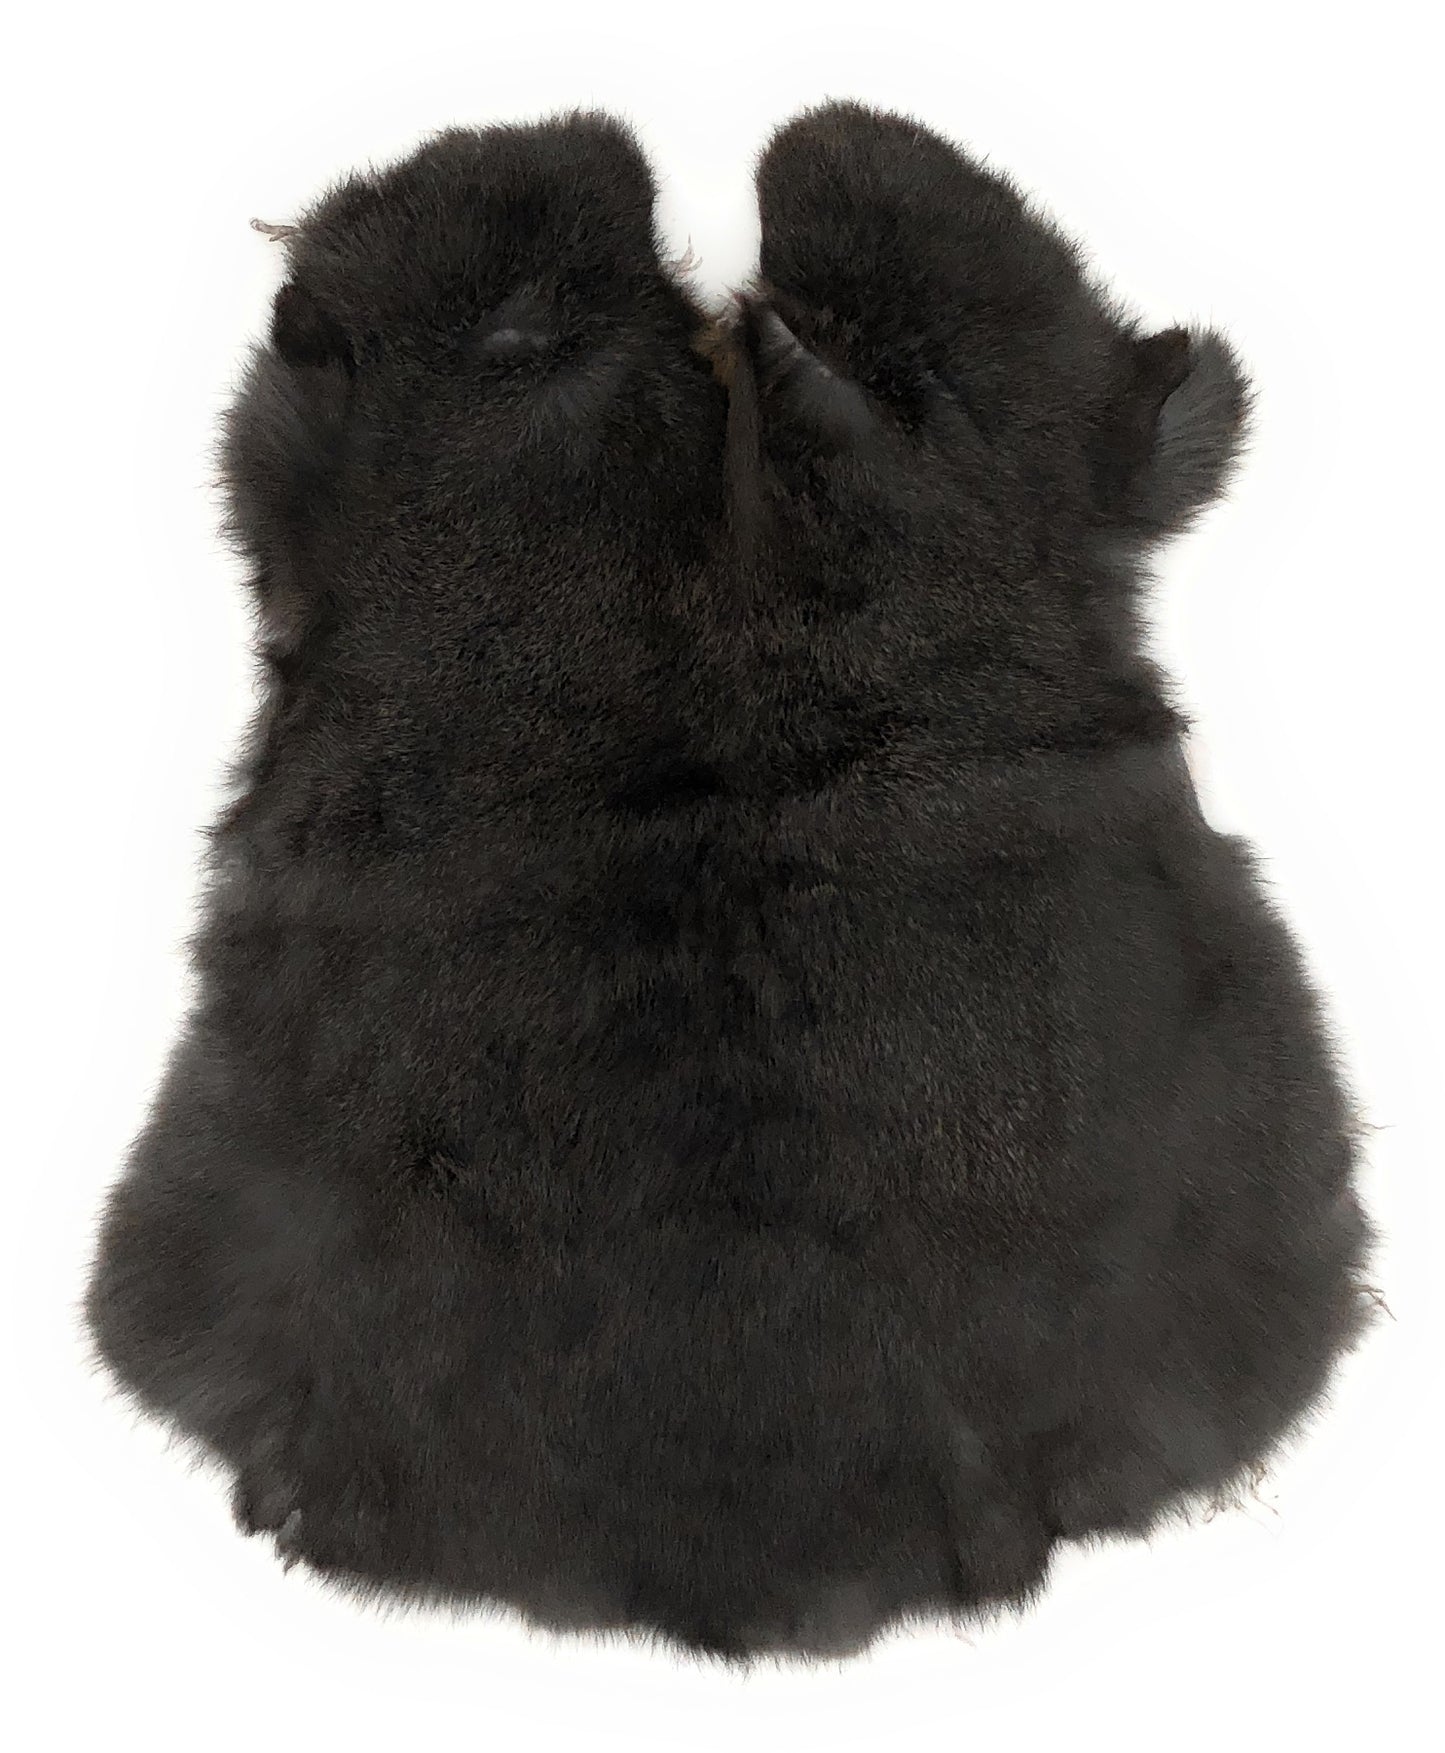 Native Crafts Wholesale - Now Open to the Public!: Black and White Rabbit  Fur Pelts [BBH-IAA-BlkWhtRabbitFur] - $14.96